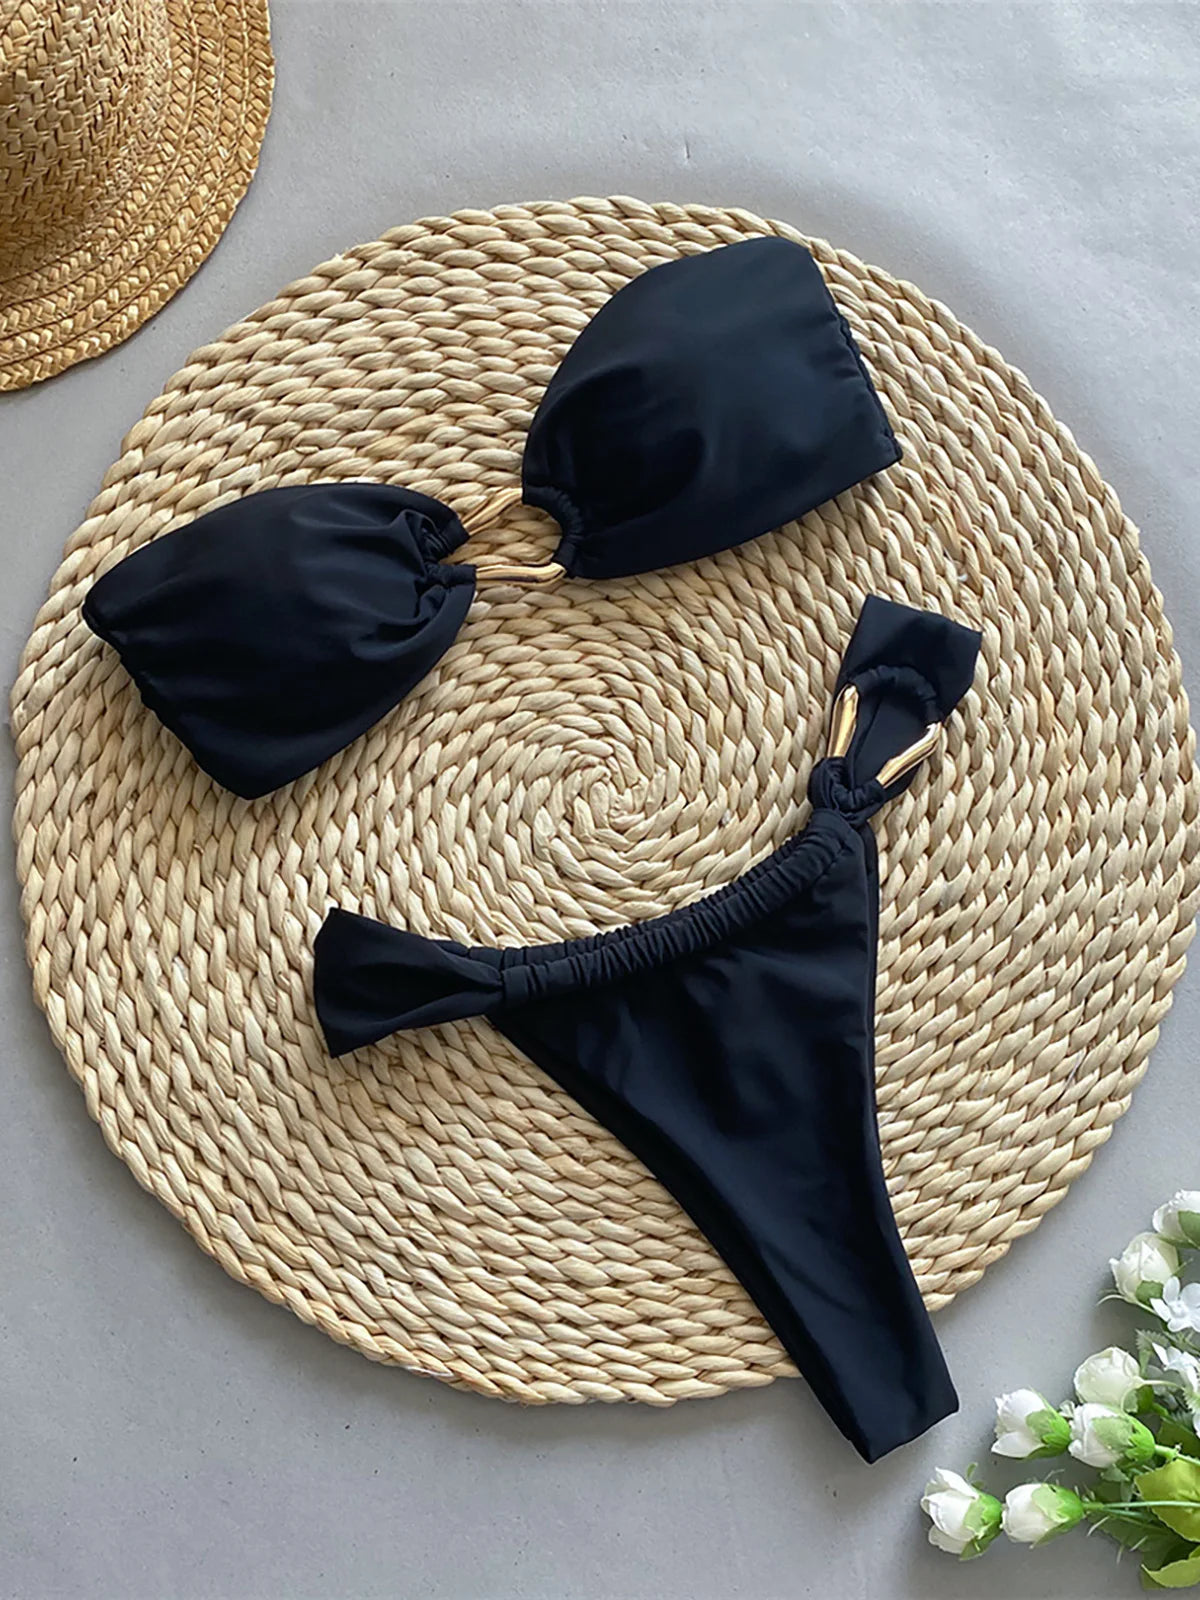 Captivating Bandeau Bikini Set for Women, Features High-Leg Cut and Chic Metal Rings, Two-Piece Swimsuit, Fits True to Size, Available in Sizes S to XL, Material: Nylon and Spandex, Solid Pattern, Low Waist, Wire Free, Modern and Sleek Black Design, Perfect for a Bold Statement Look, Includes Padding